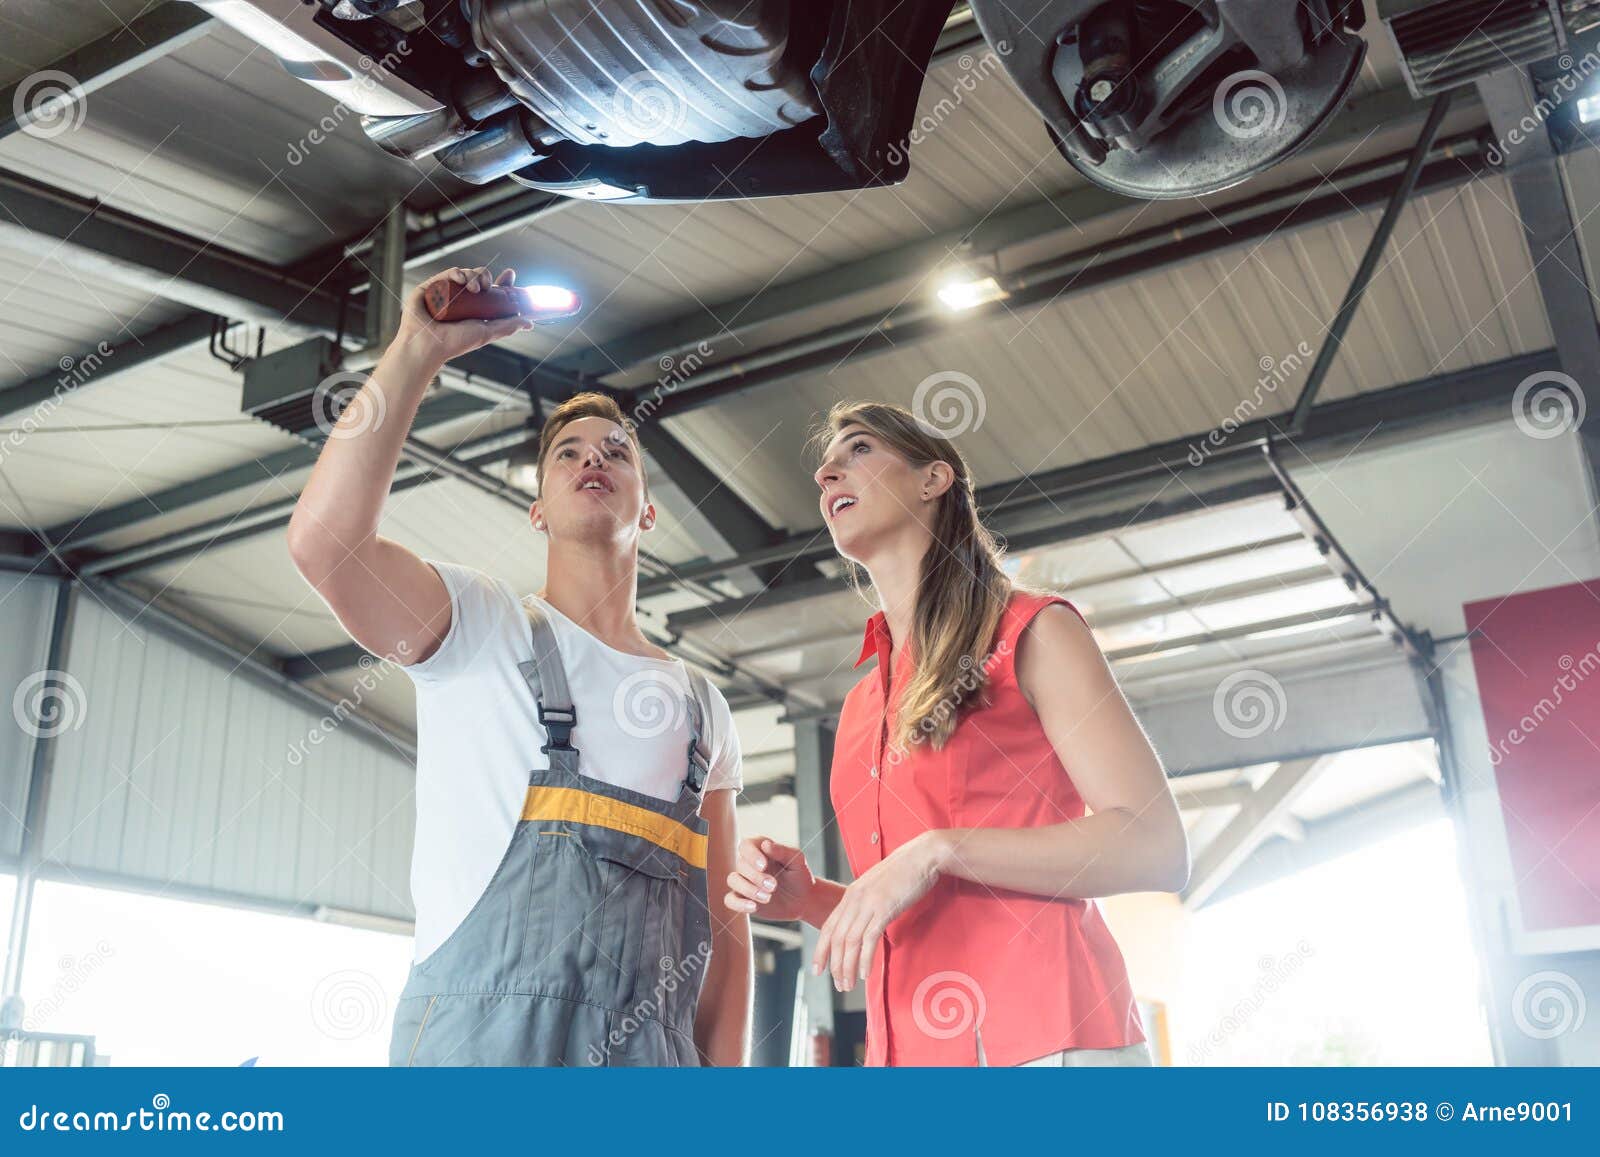 reliable auto mechanic checking the car of a woman in a modern a